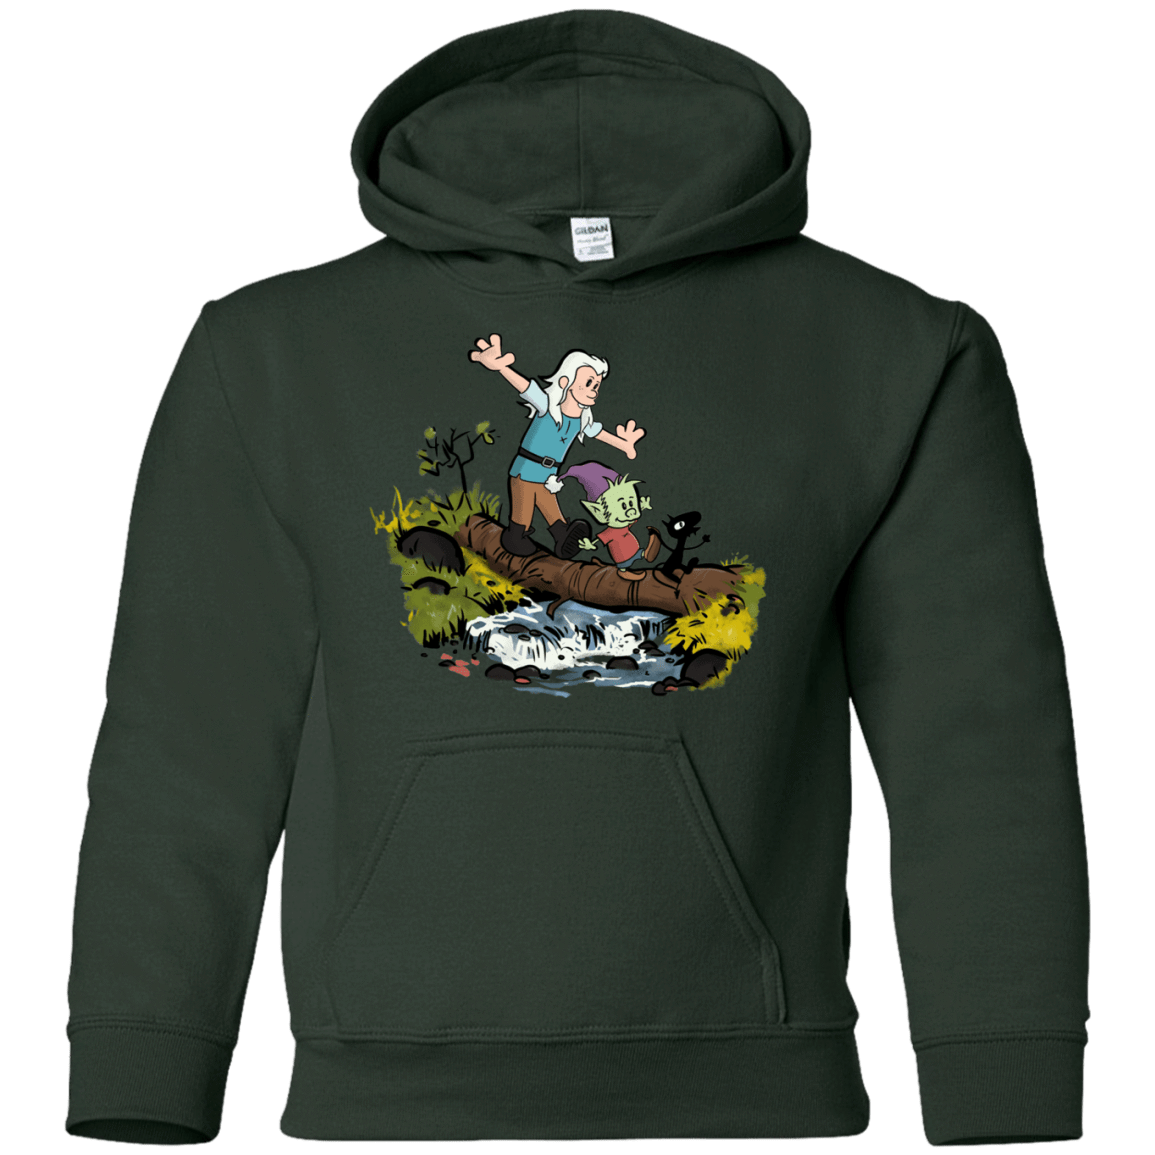 Sweatshirts Forest Green / YS Bean and Elfo Youth Hoodie